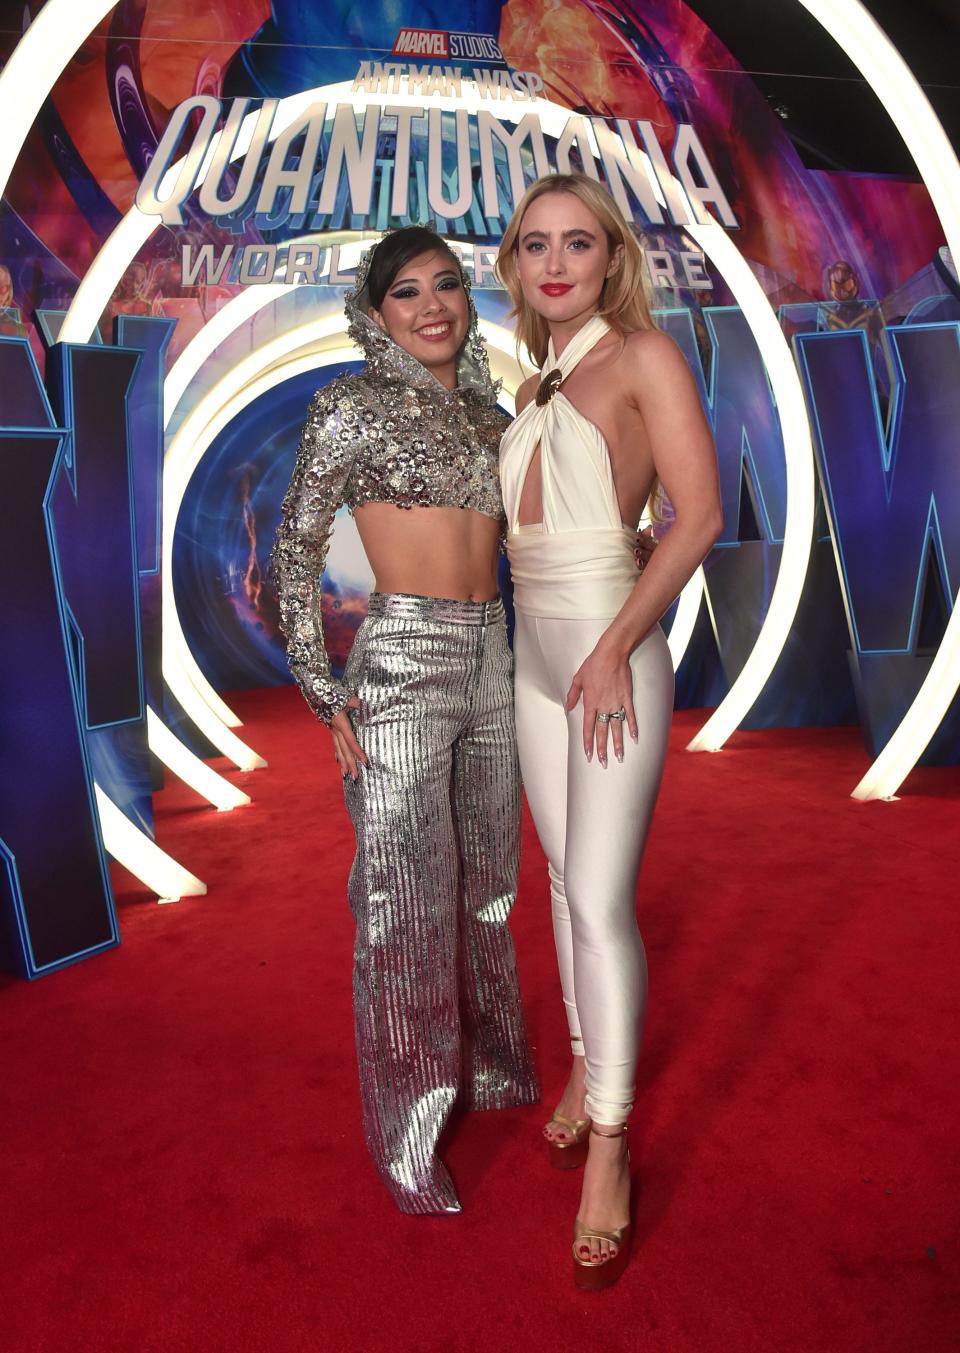 Young Marvel stars Xochitl Gomez and Kathryn Newton pose together at the Hollywood premiere of "Ant-Man and the Wasp: Quantumania."